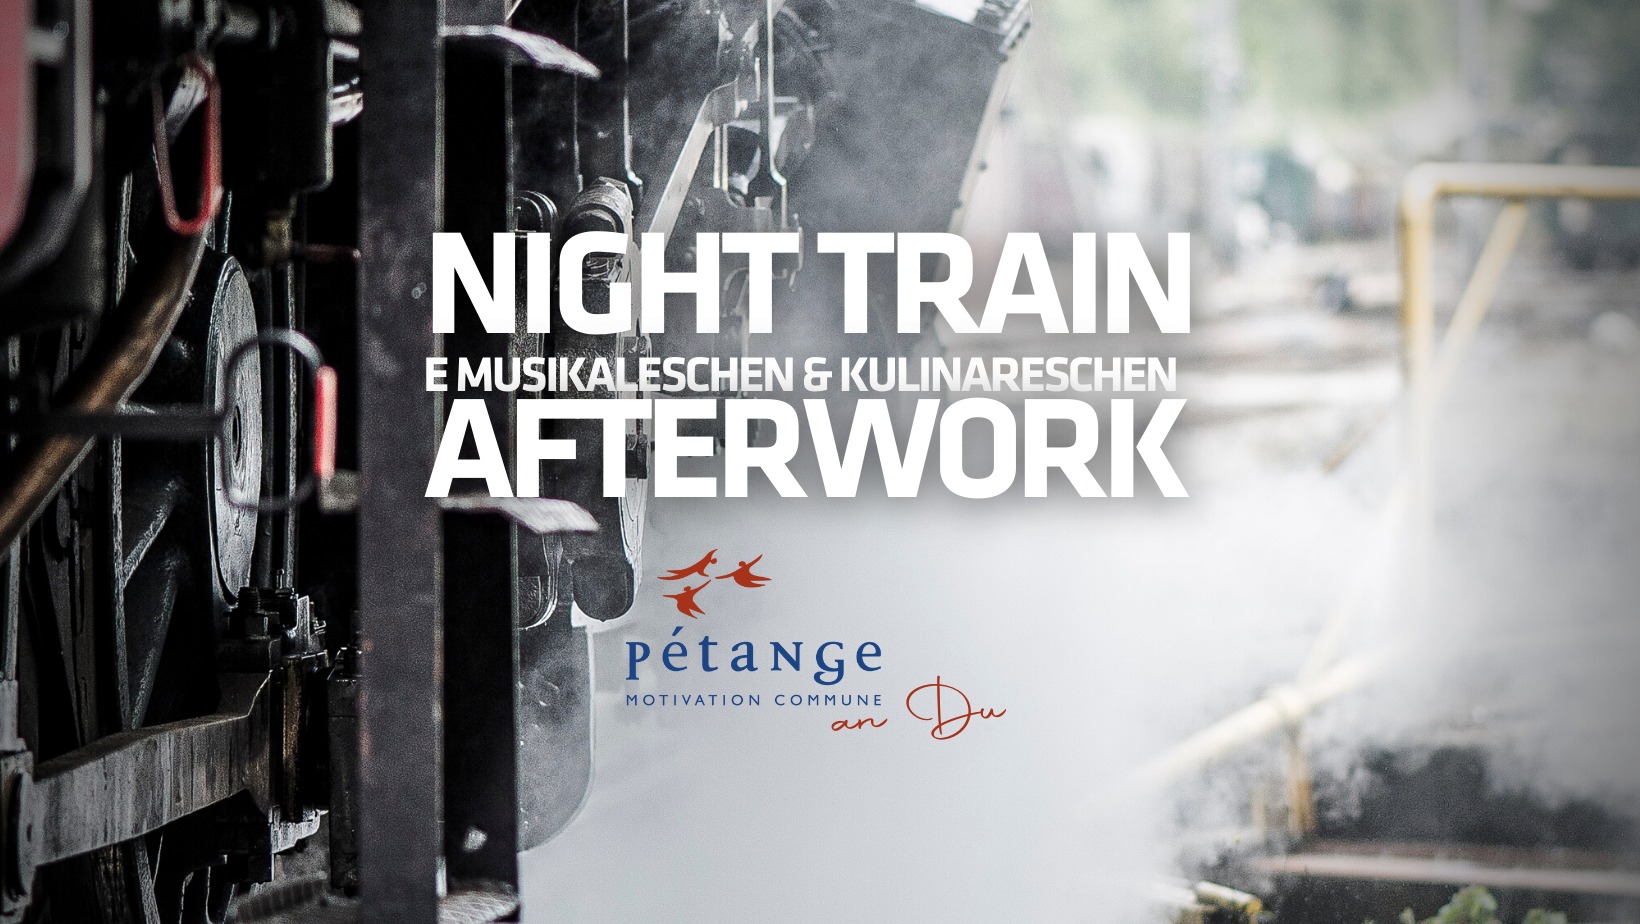 Night Train – a culinary and musical afterwork